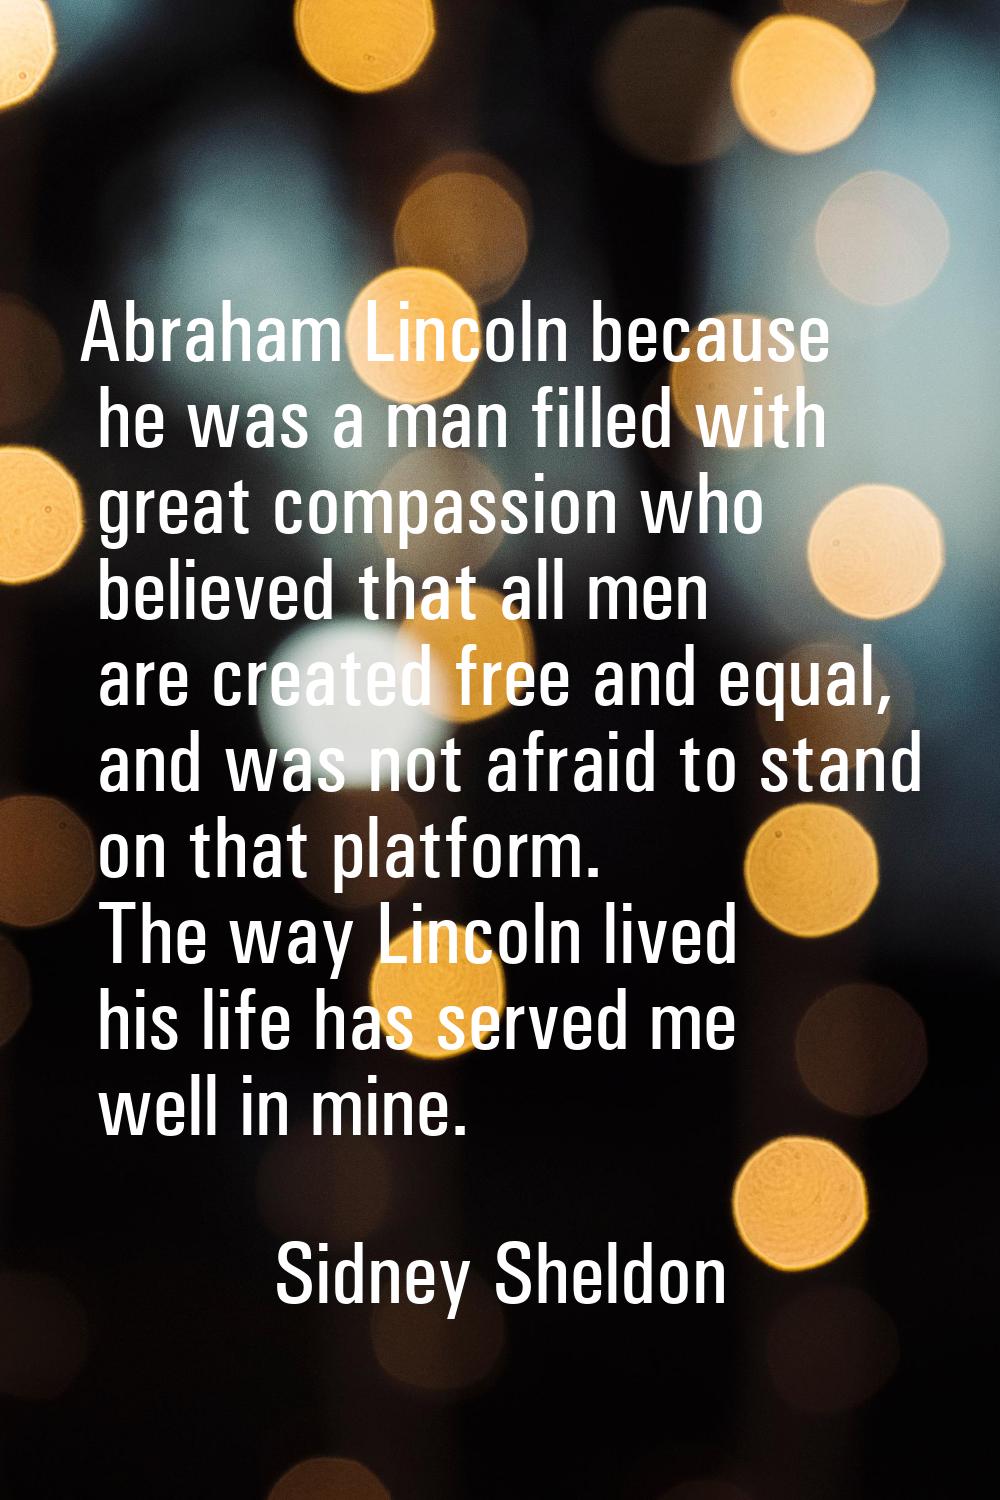 Abraham Lincoln because he was a man filled with great compassion who believed that all men are cre